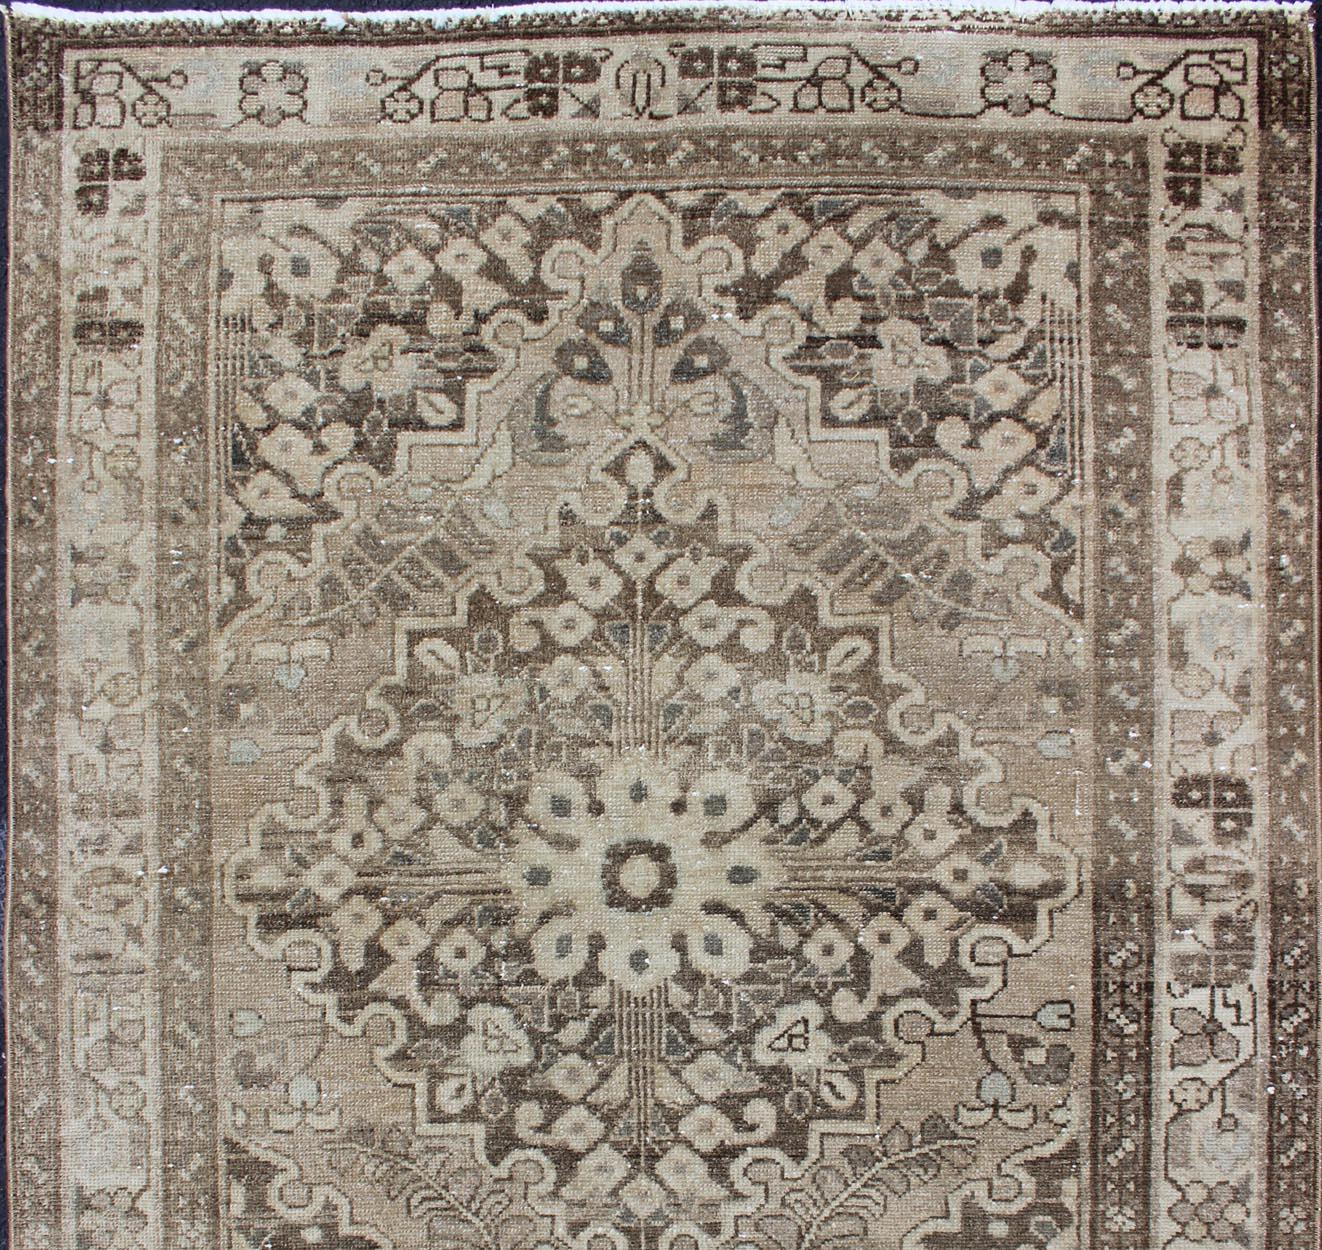 Vintage Persian Lilihan rug with center medallion in neutral tones, rug h-711-39, country of origin / type: Iran / Lilihan, circa 1950

This spectacular midcentury Persian Lilihan (circa 1950) bears a magnificent splendor indicative of royal